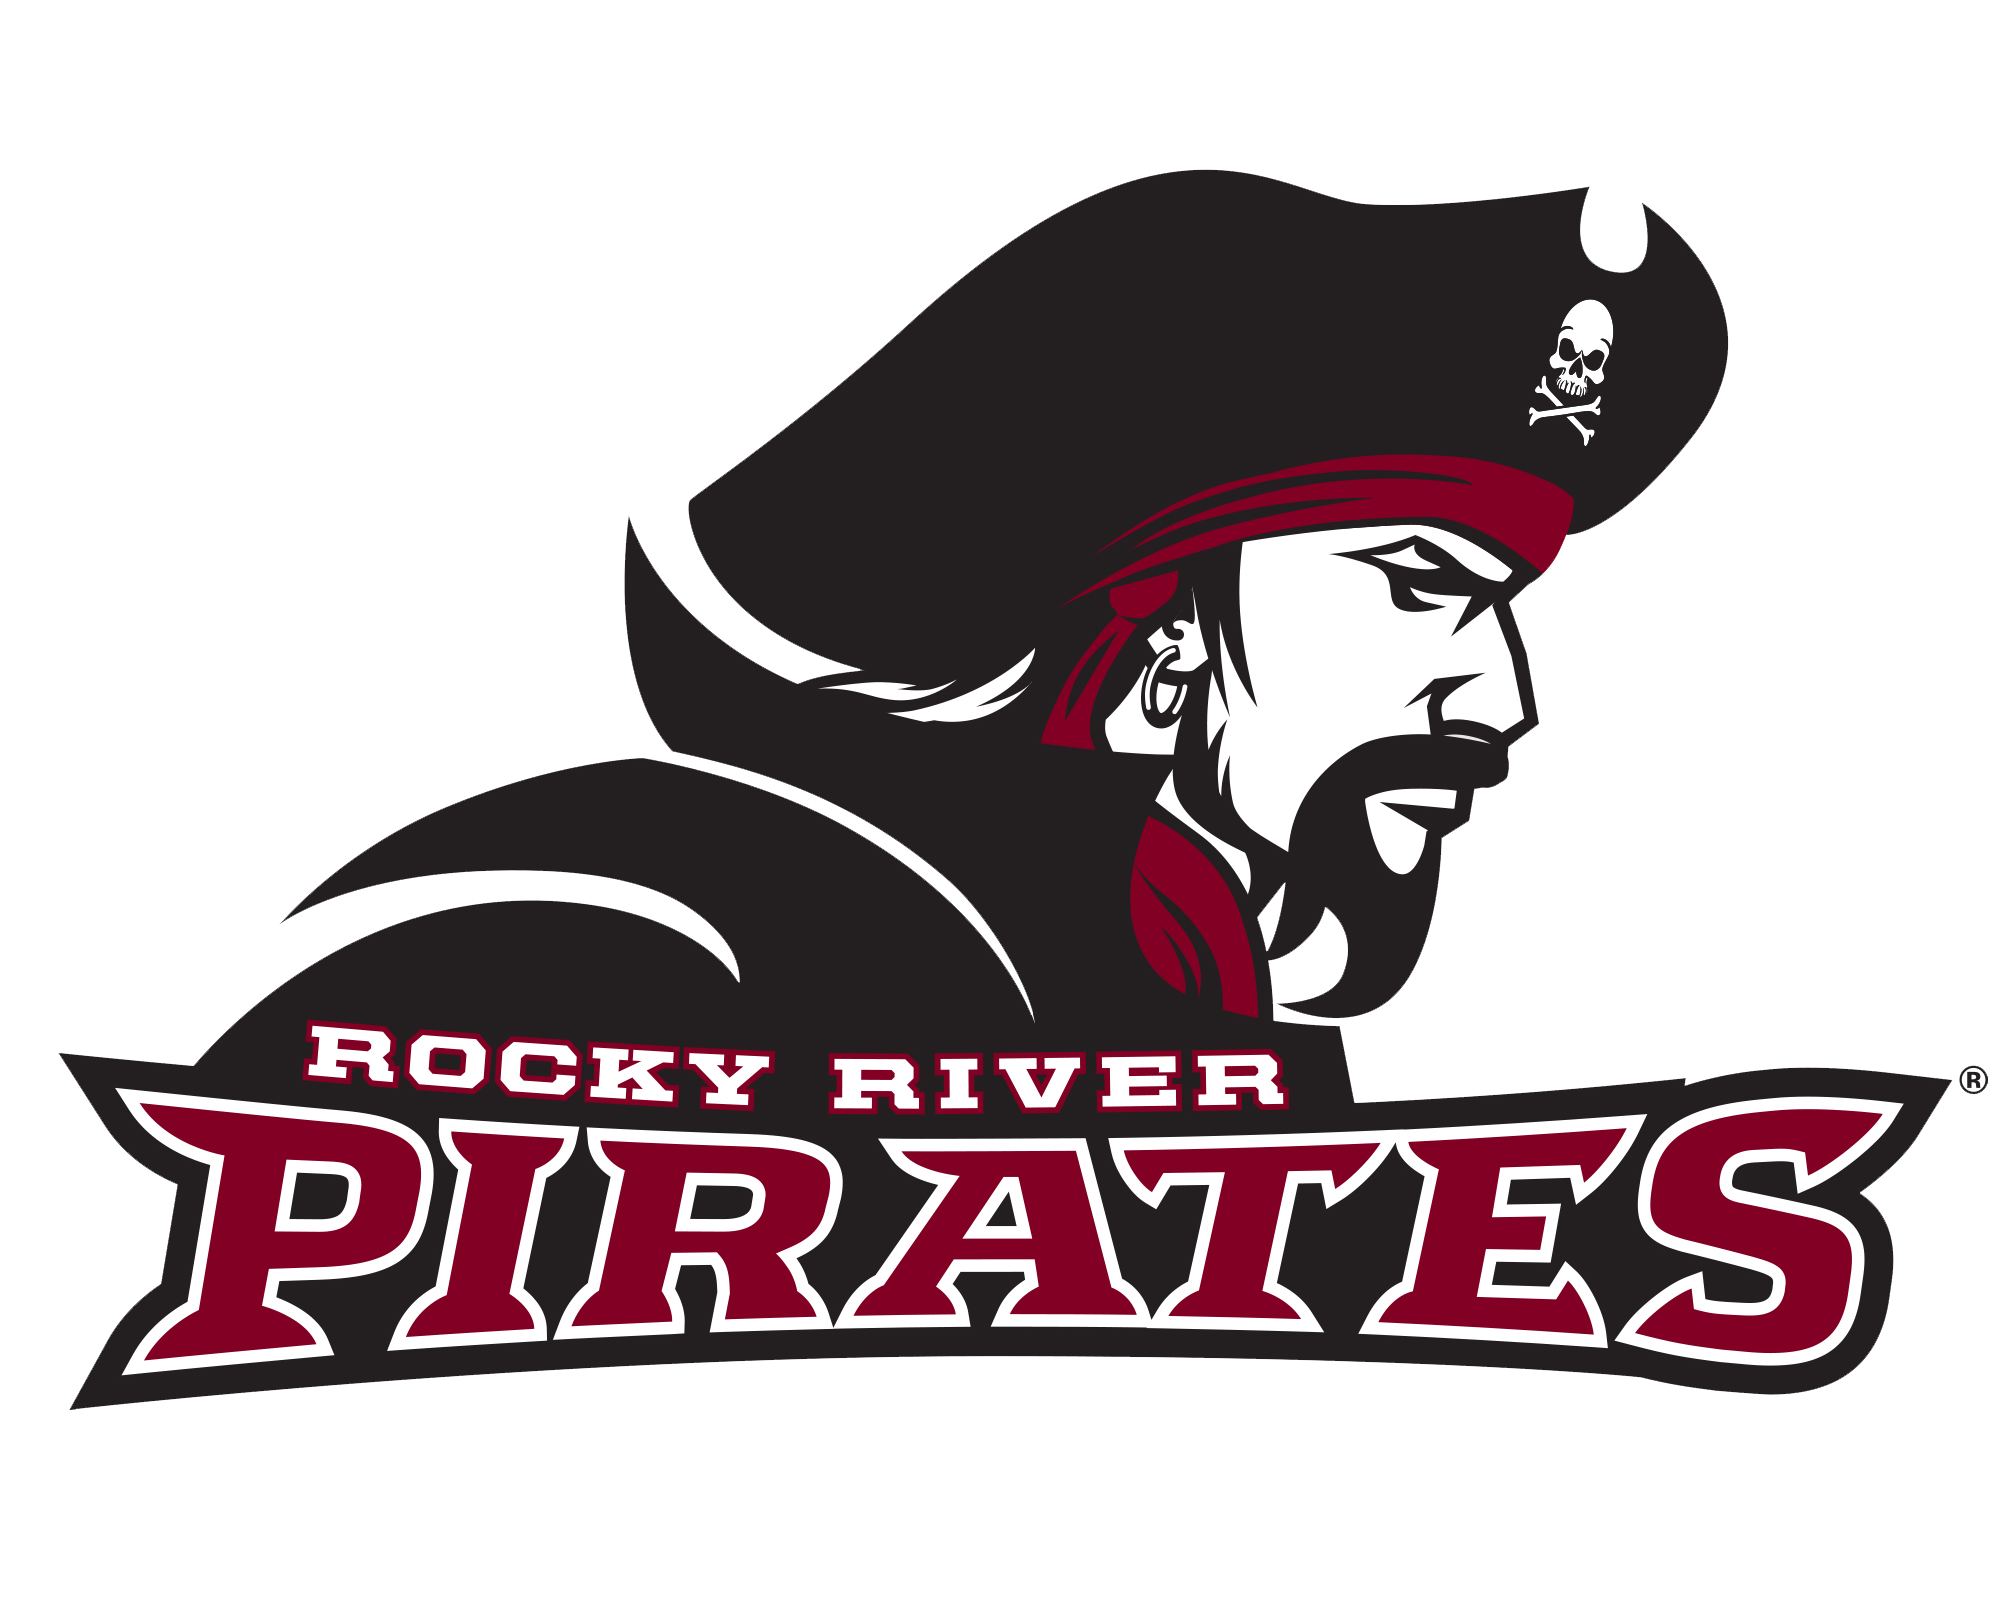 C:\Users\pruggles\Documents\Athletics\Logos\GLC Logos\Rocky River\Rocky River.png